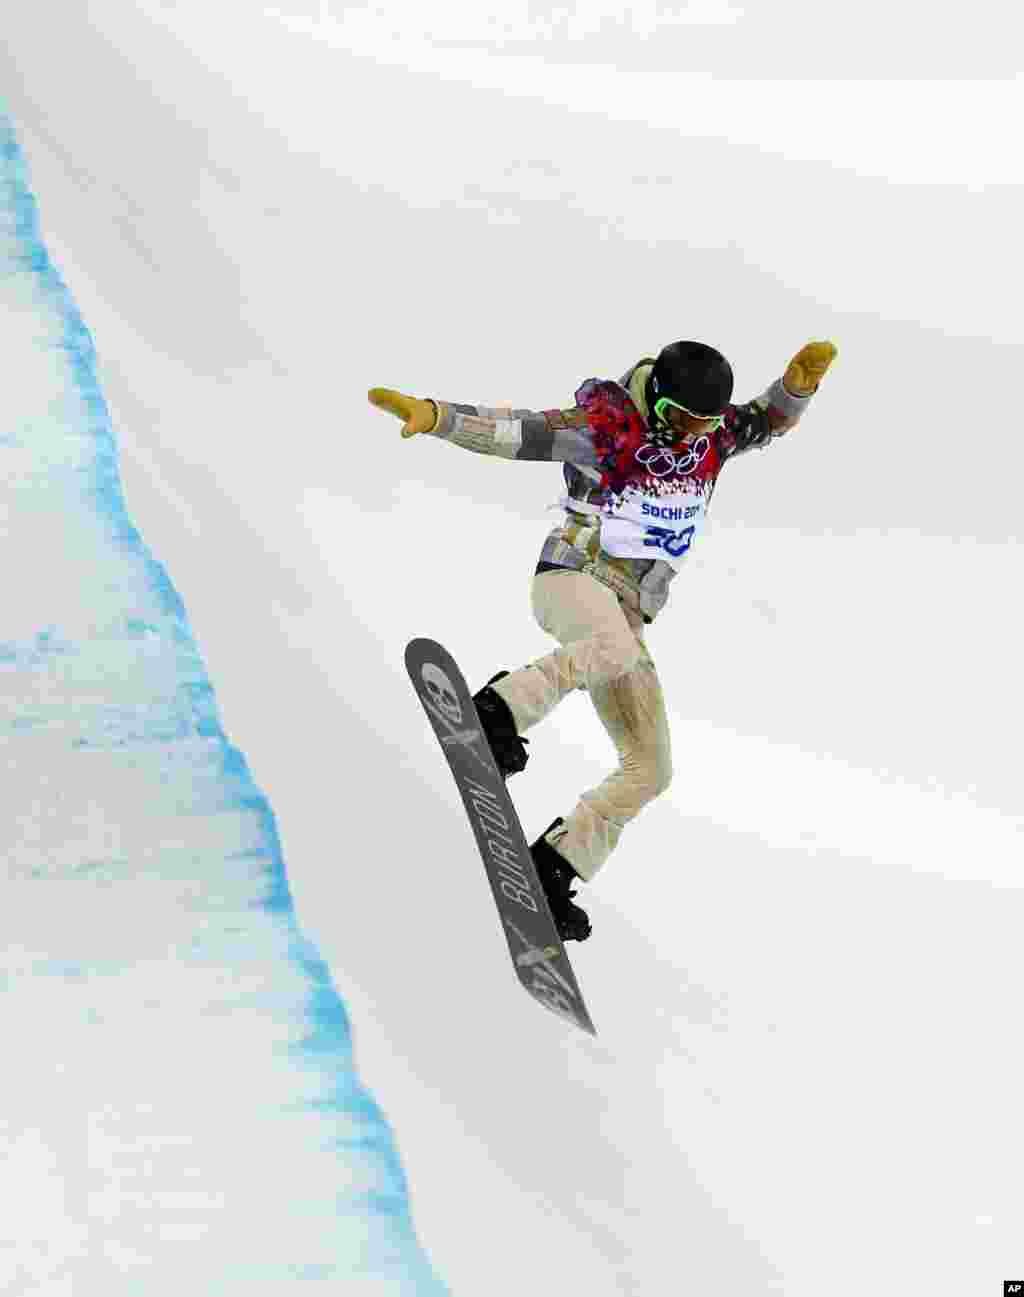 Shaun White of the United States trains in the half pipe at Rosa Khutor Extreme Park, in Krasnaya Polyana, Russia,&nbsp;Feb. 9, 2014.